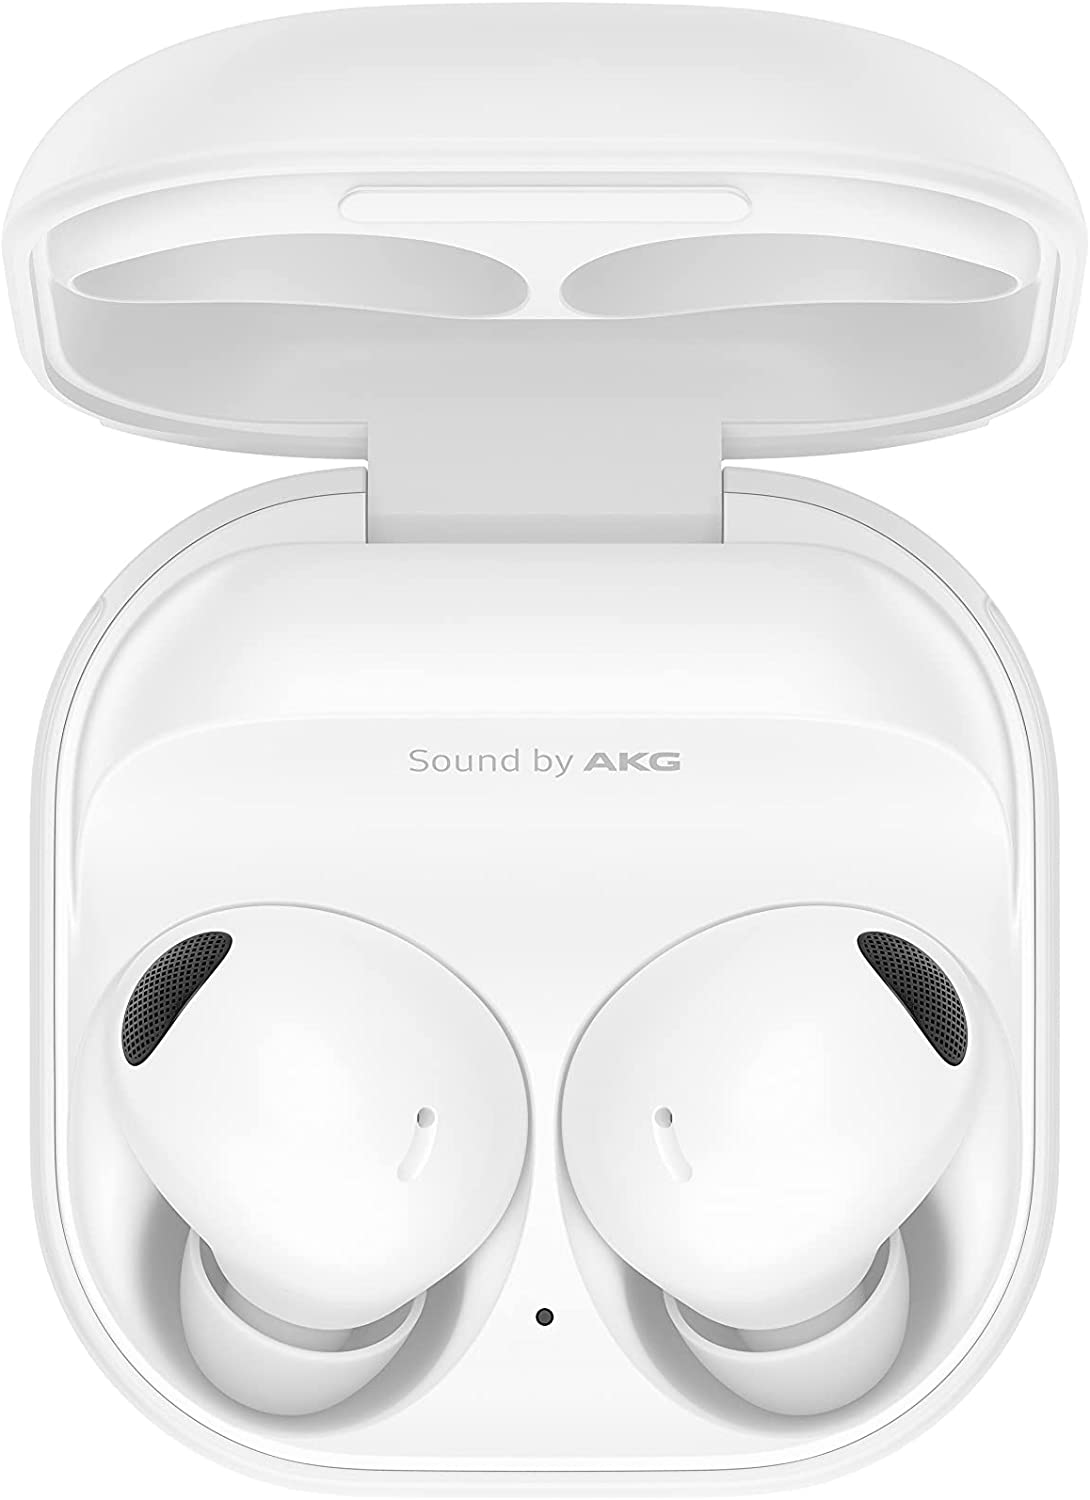 10 Best AirPod Alternatives for iPhone & iPad 5